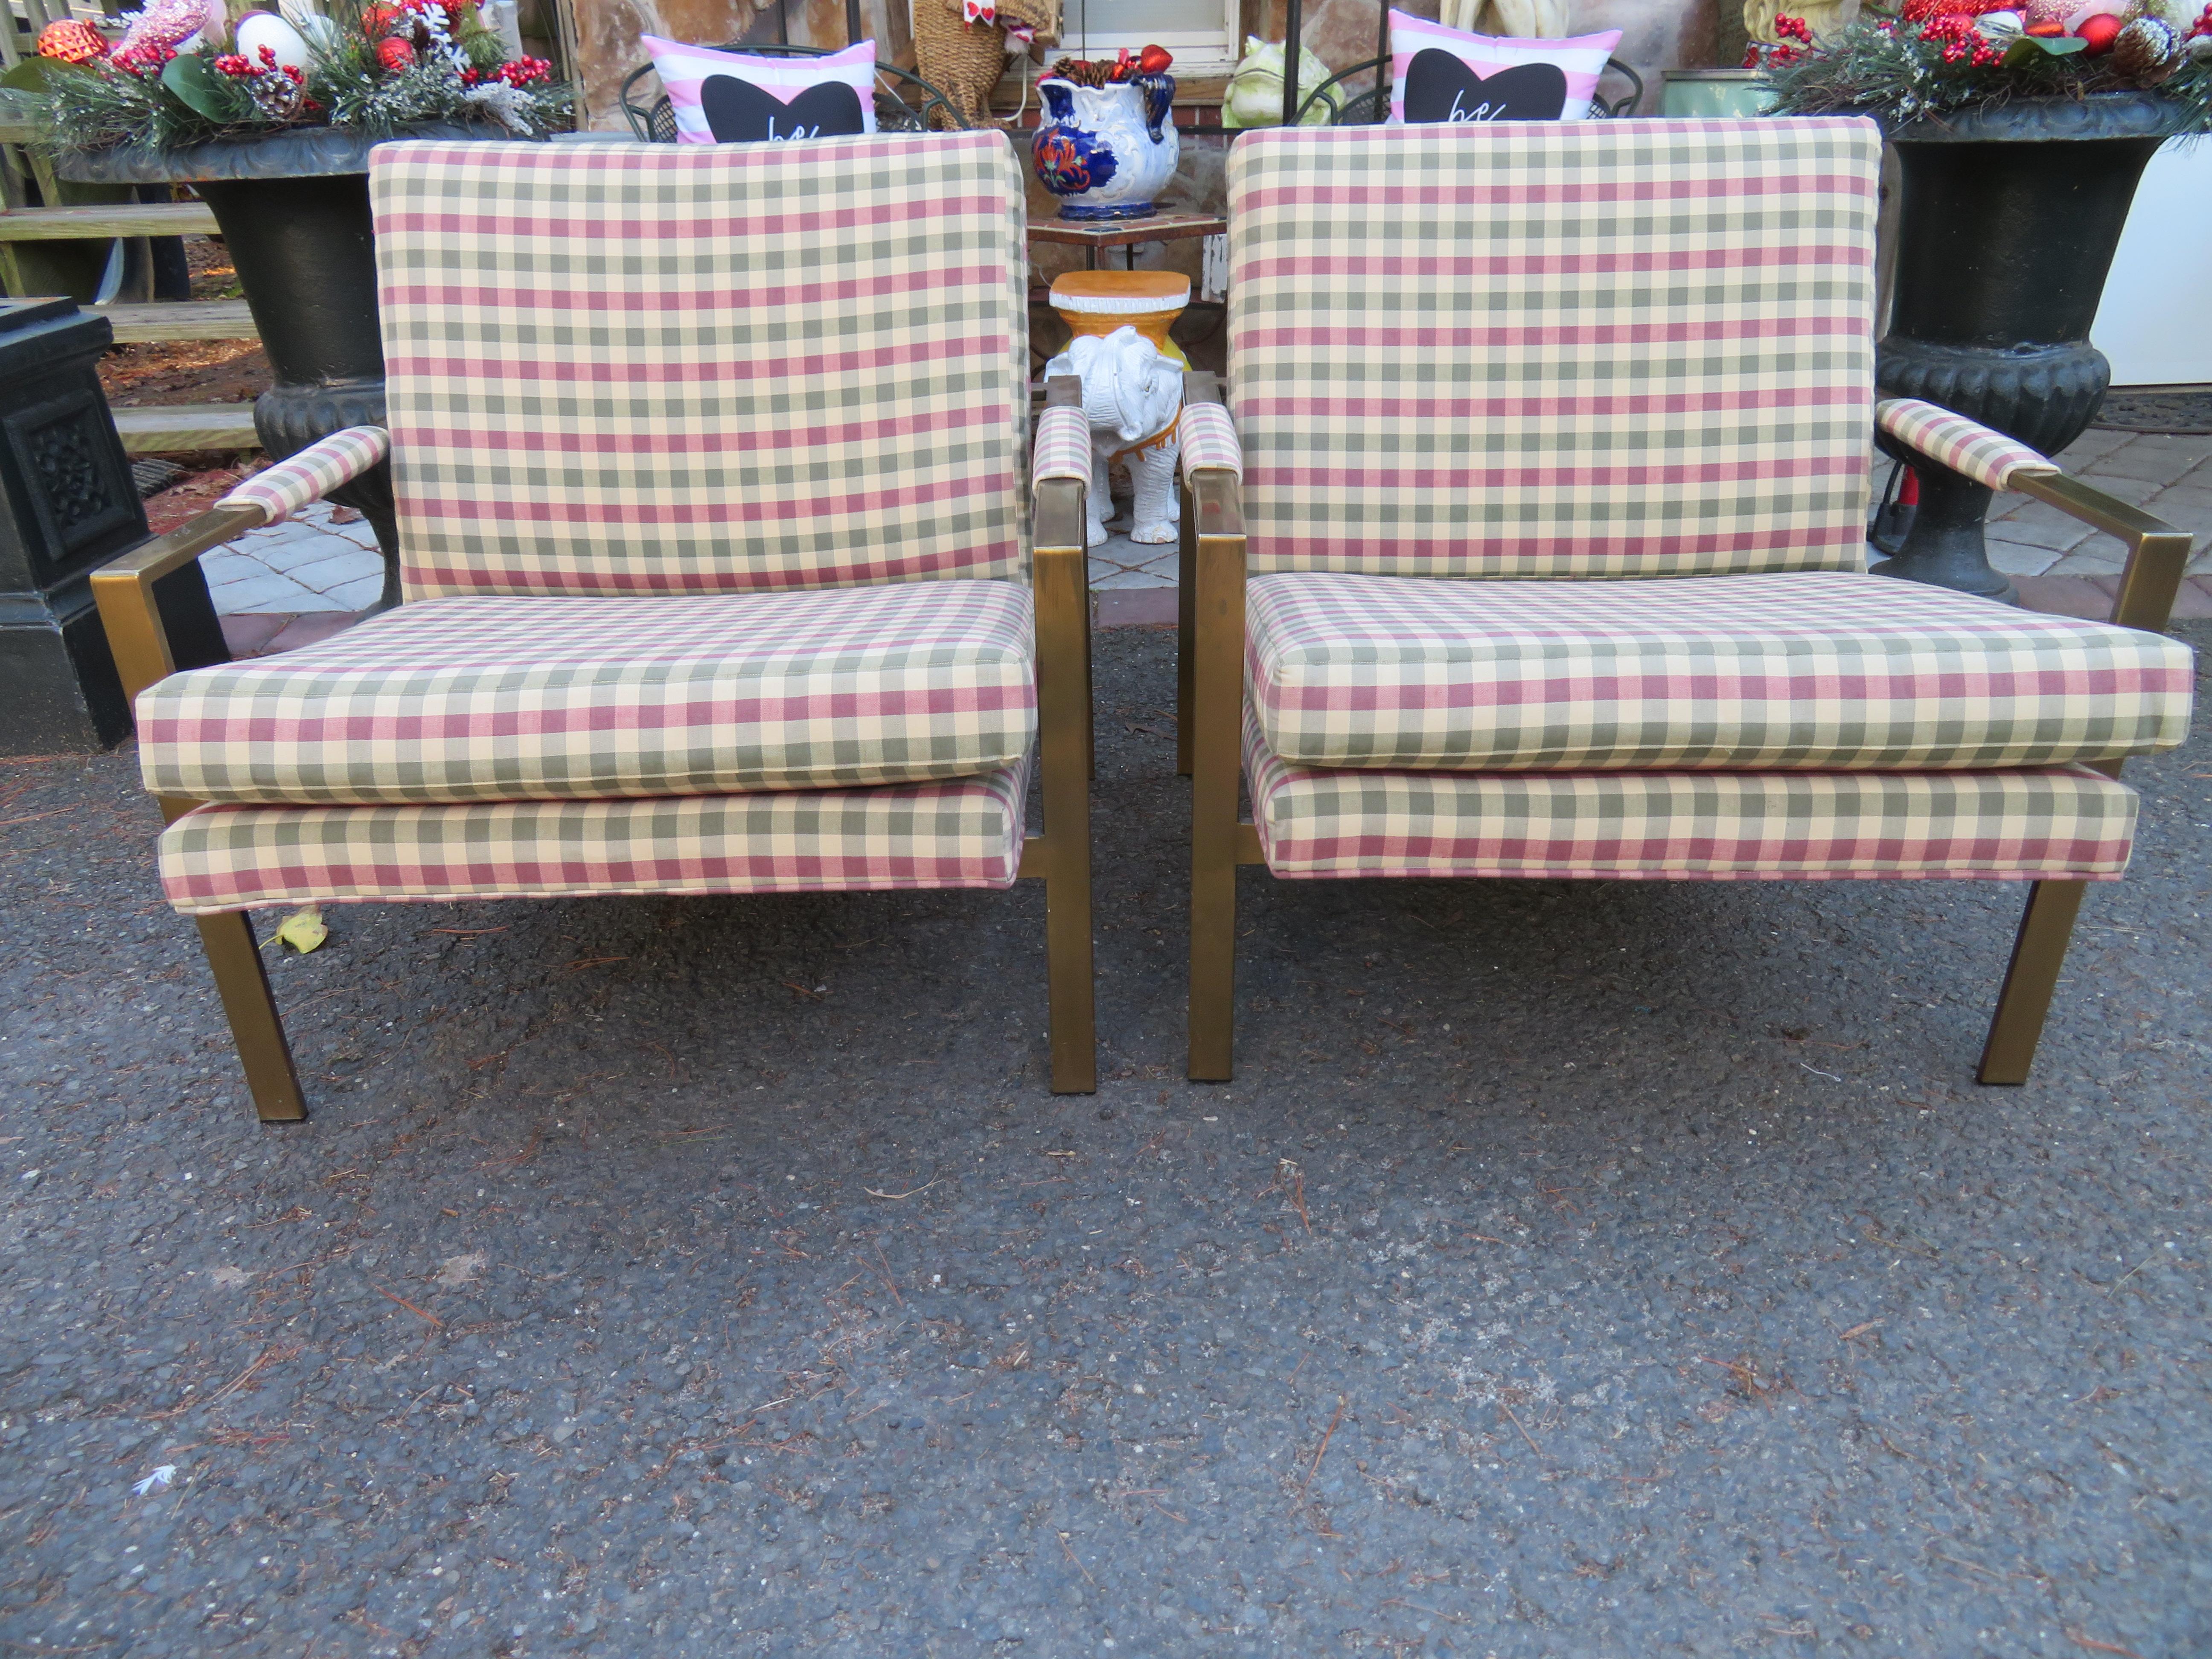 Handsome pair of Milo Baughman brass cube chairs by Thayer Coggin. We love the Burberry style upholstery which appears to be recently done along with the antiqued brass frames. These charming lounge chairs have a tremendous vintage appeal. They